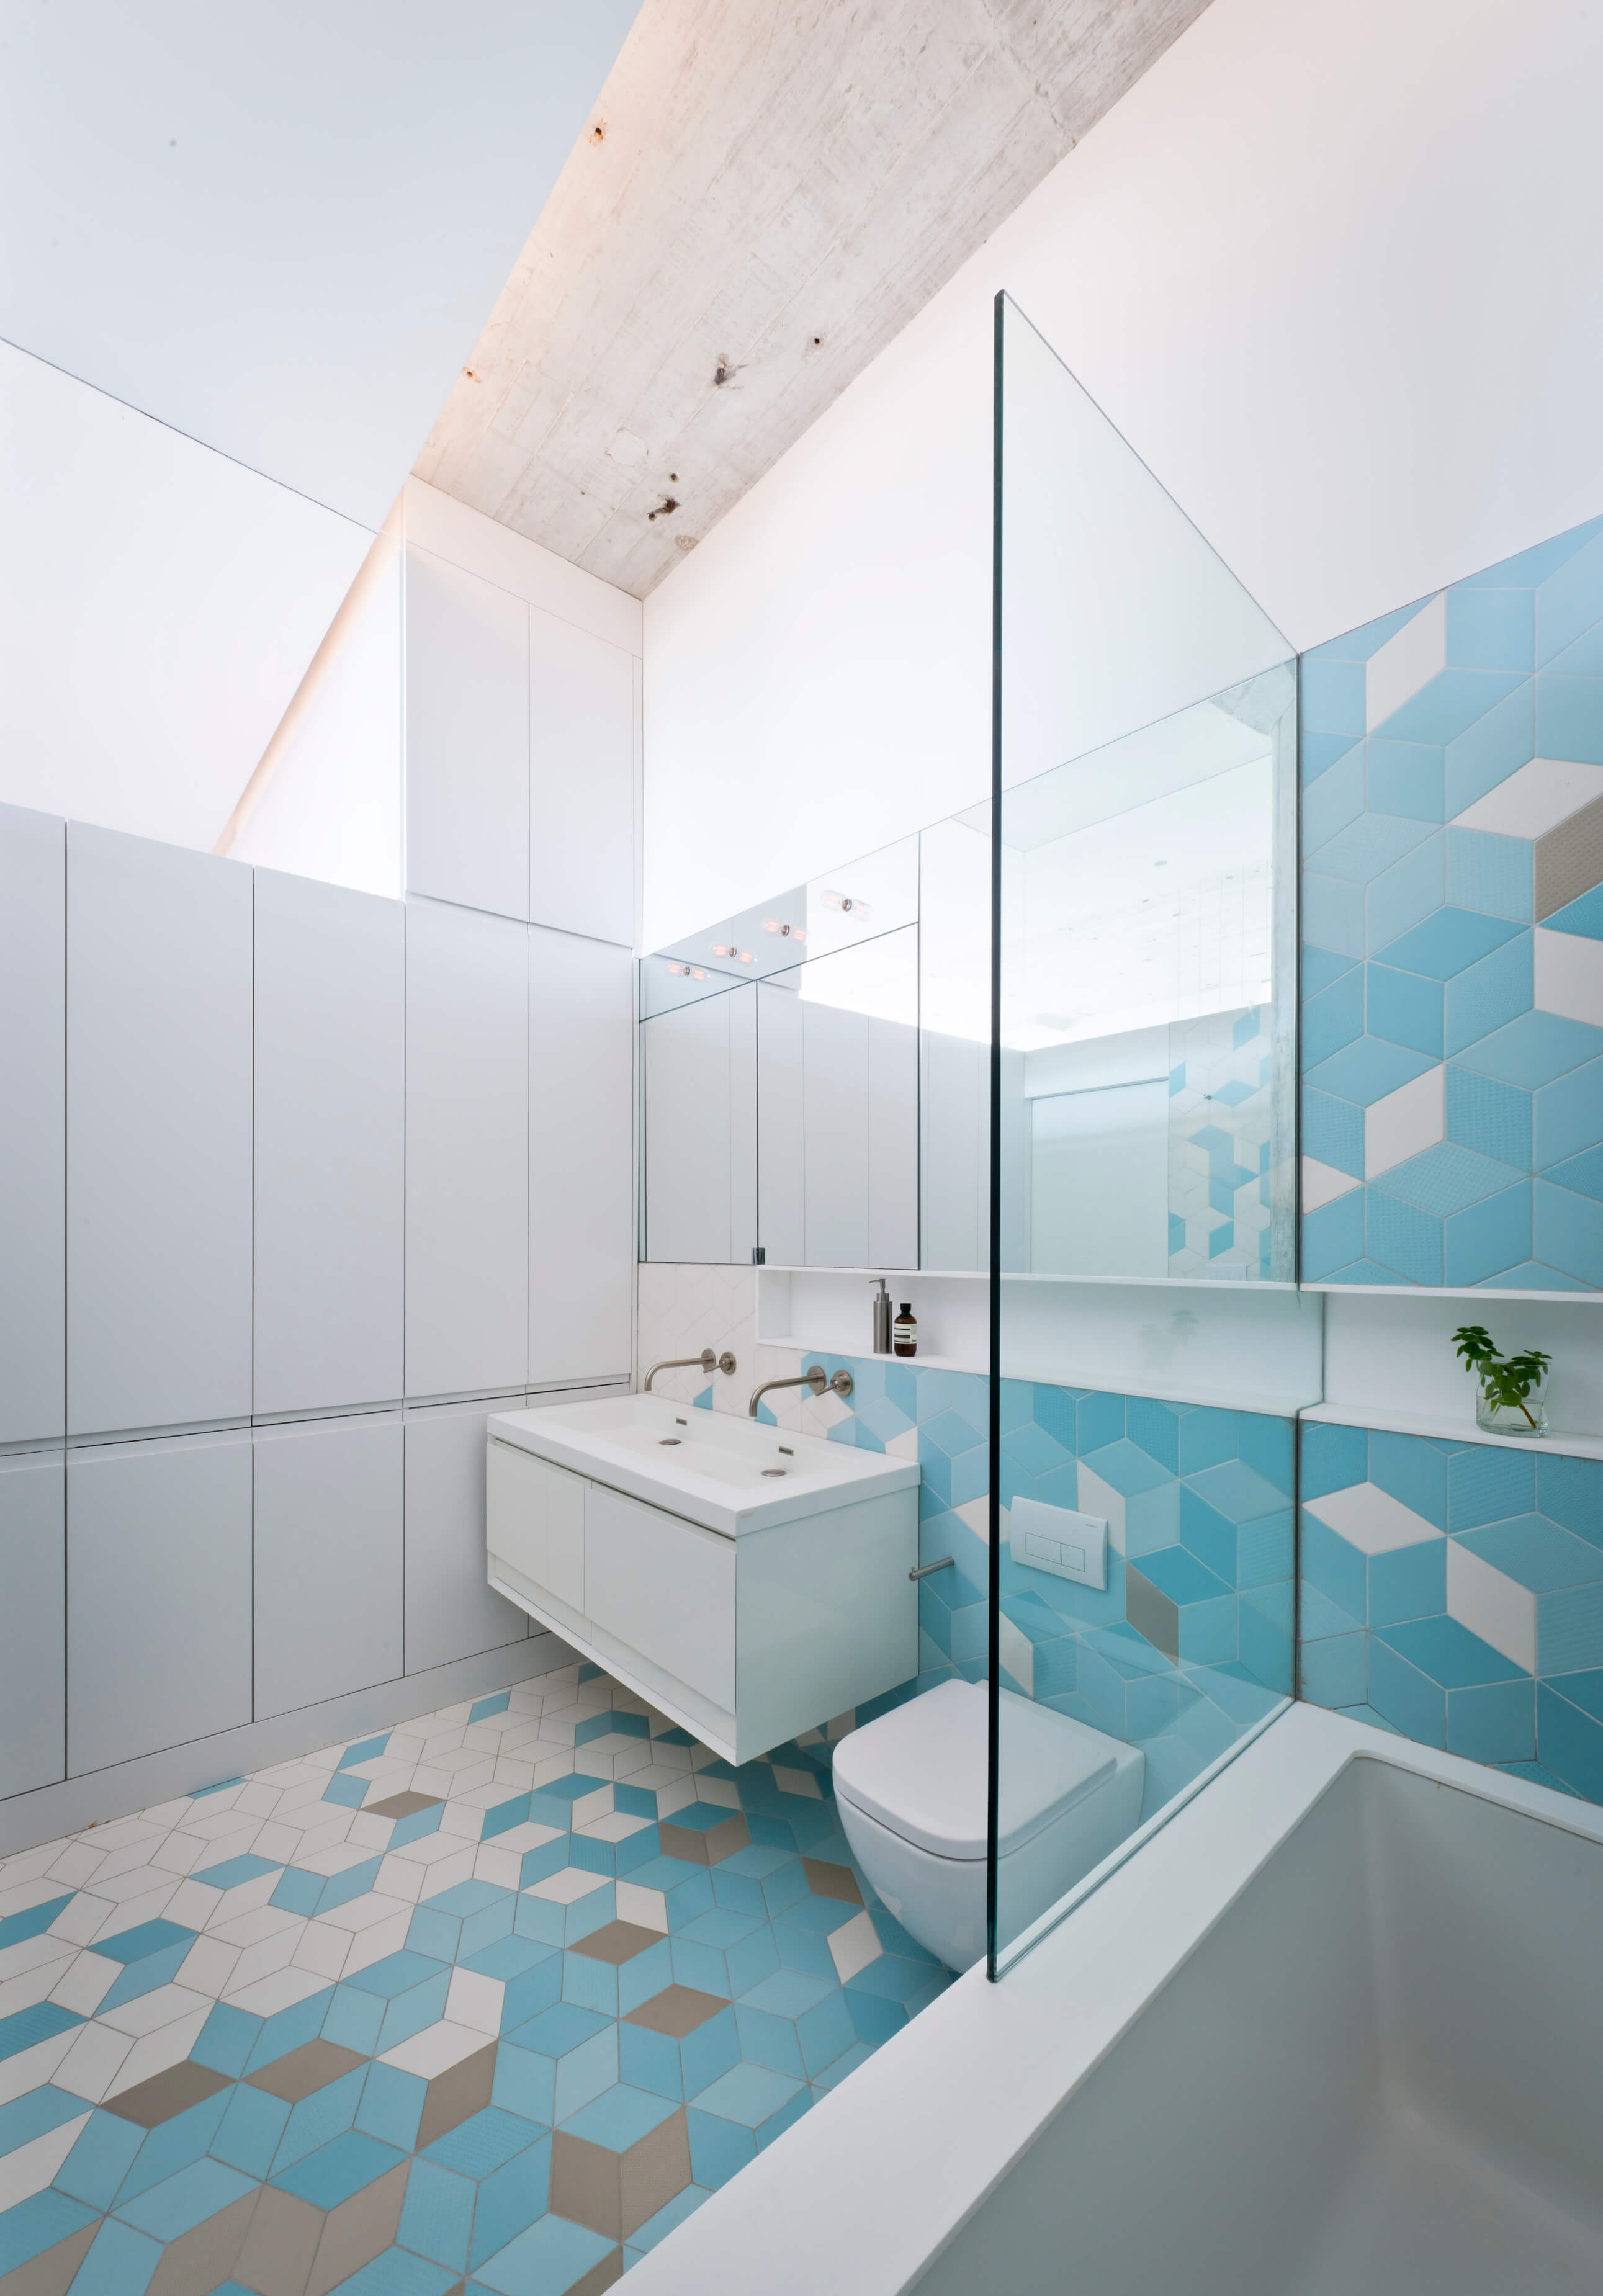 Bathroom with blue geometric tiles and white cabinets